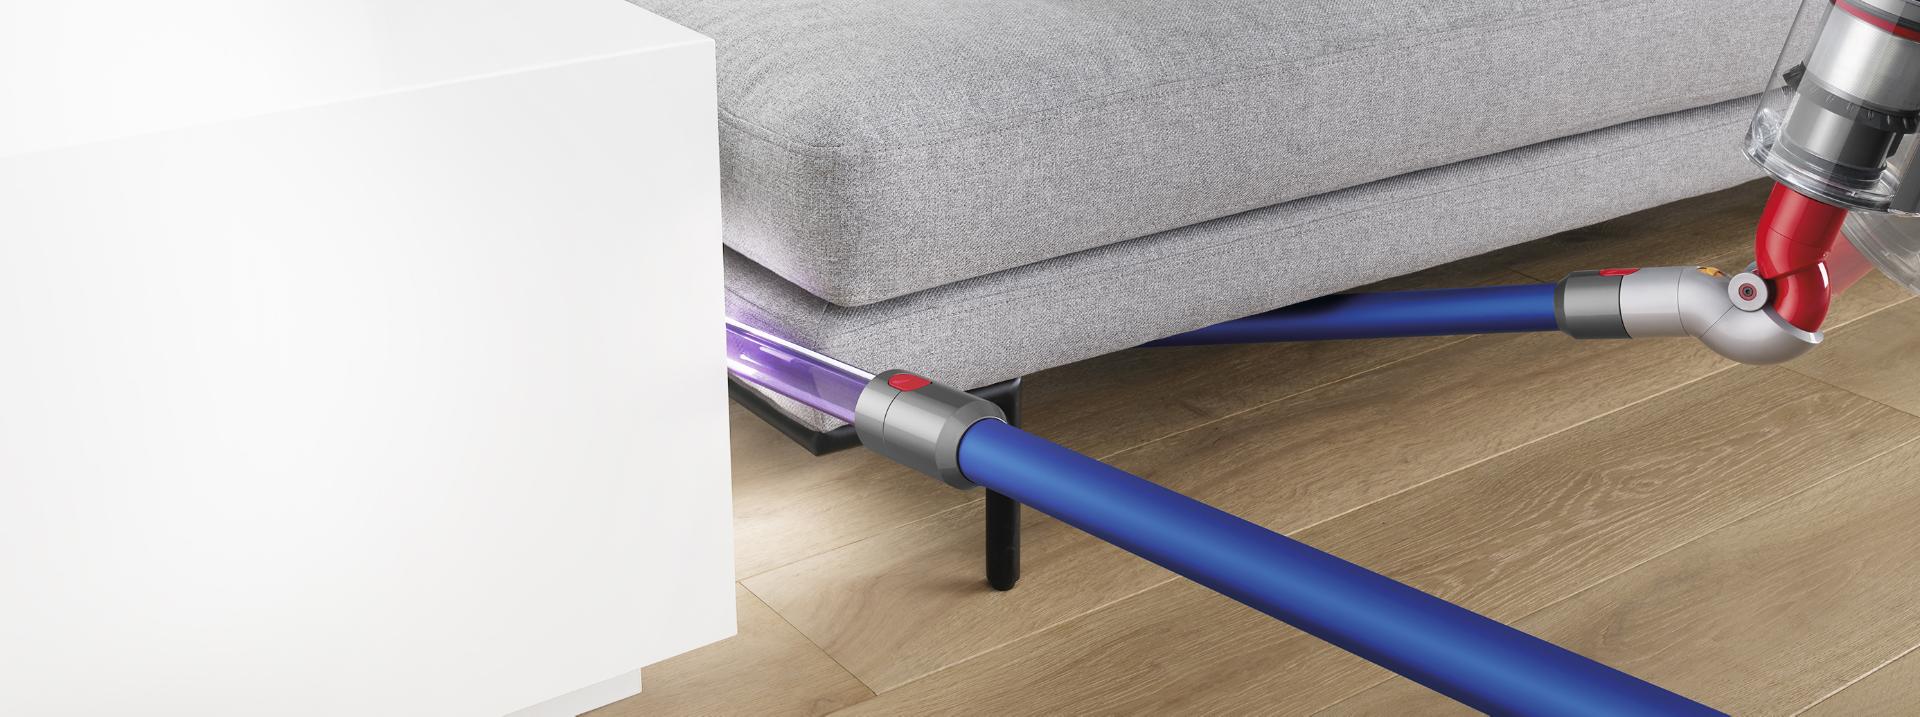 Dyson vacuum accessories cleaning a sofa